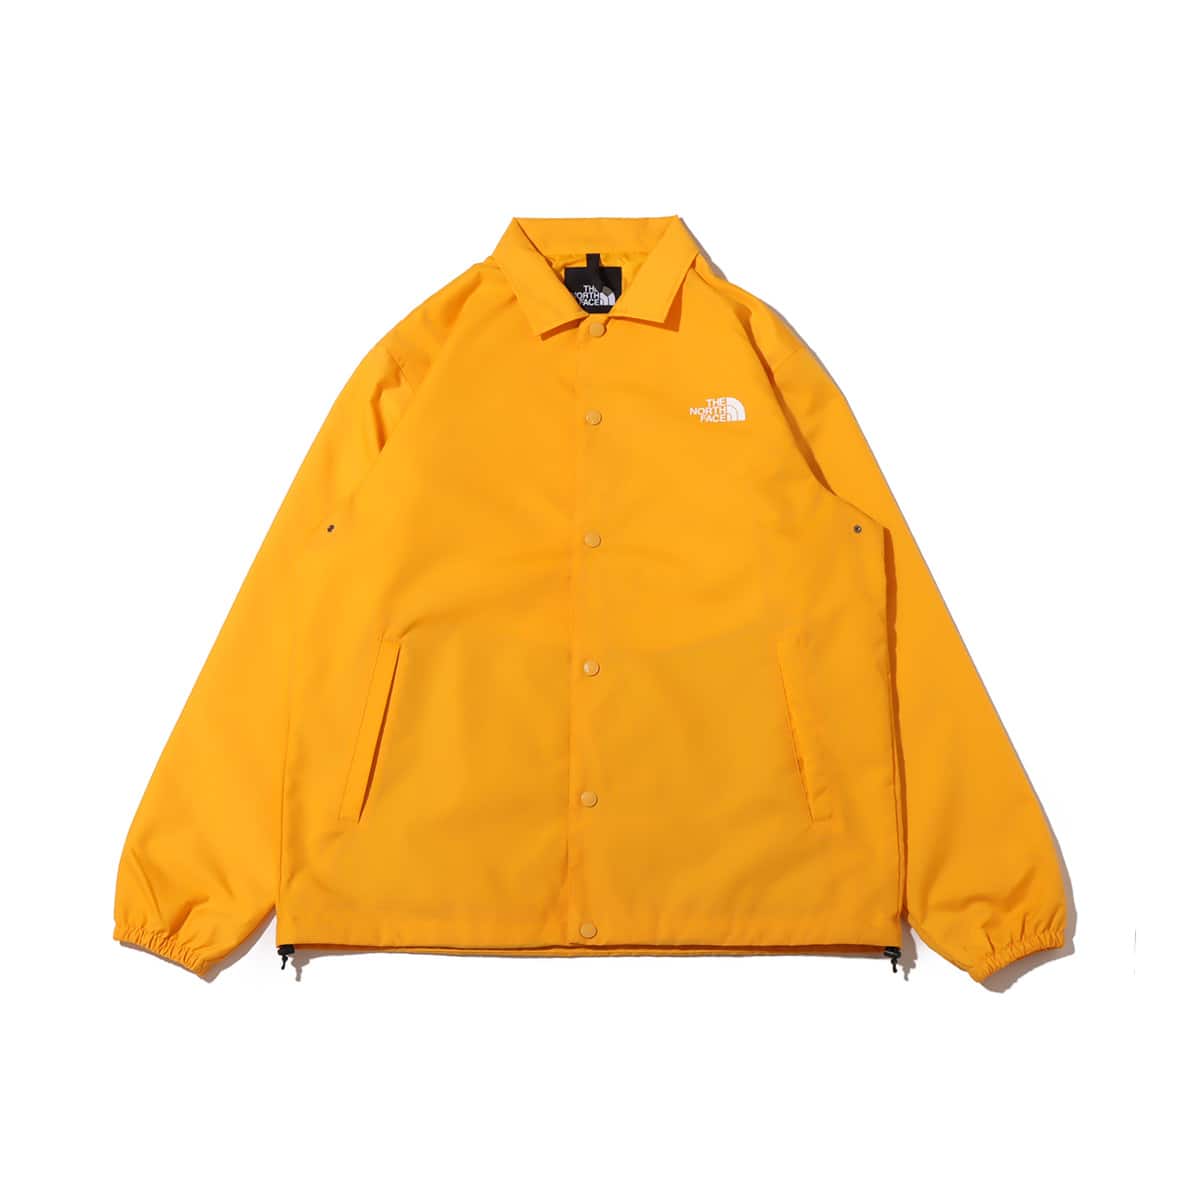 THE NORTH FACE NEVER STOP ING THE COACH JACKET サミットゴールド